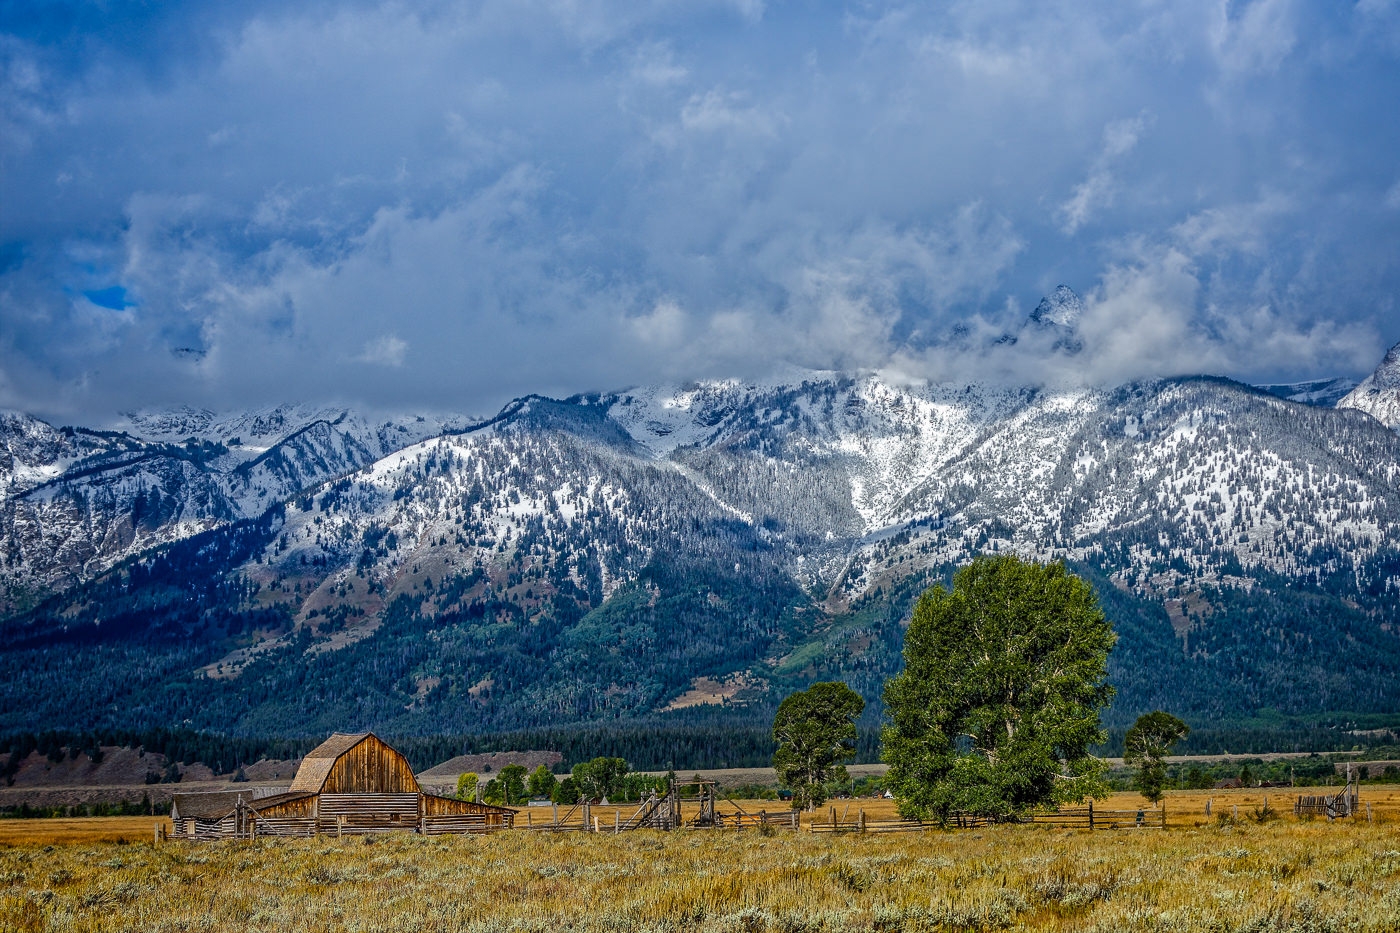 Moulton Barn and the Tetons by John McGarry